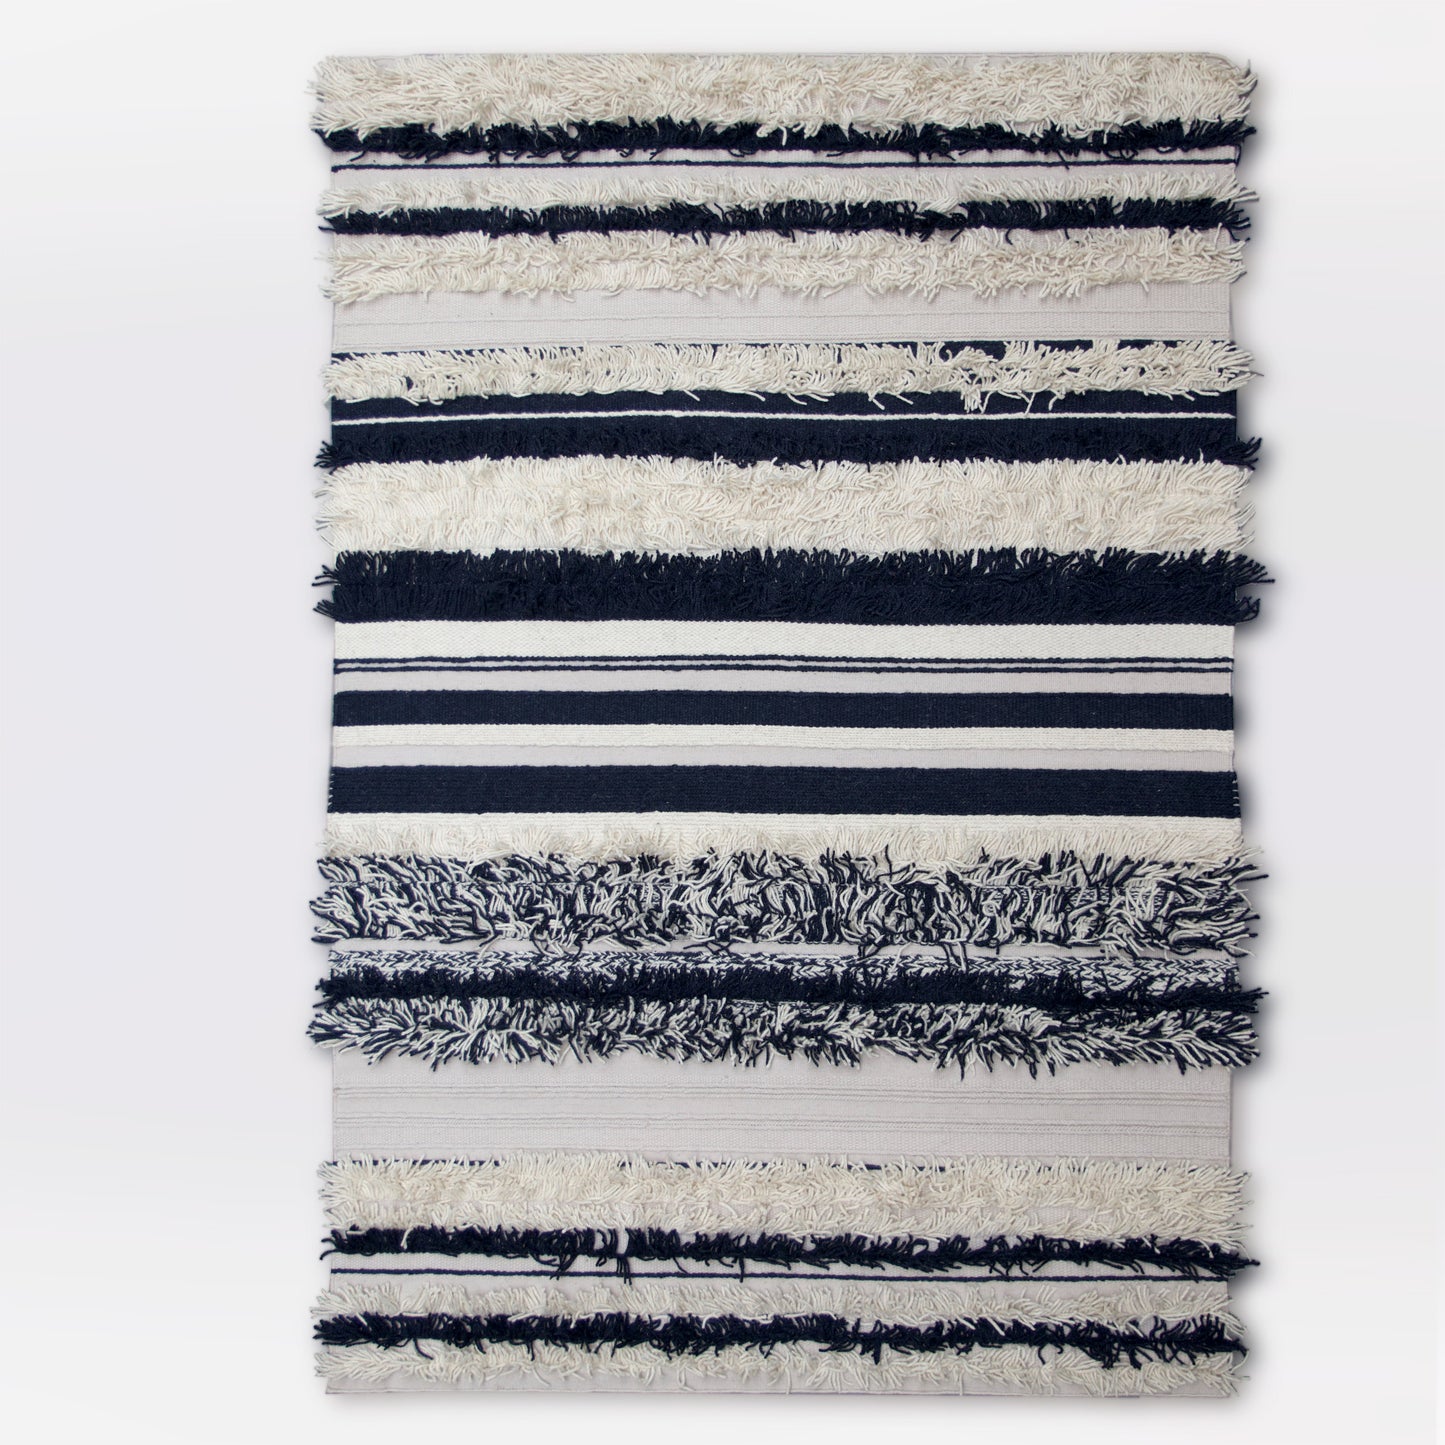 SAMPLE AFRO ECRU AND NAVY PILE RUG - 12x25cm